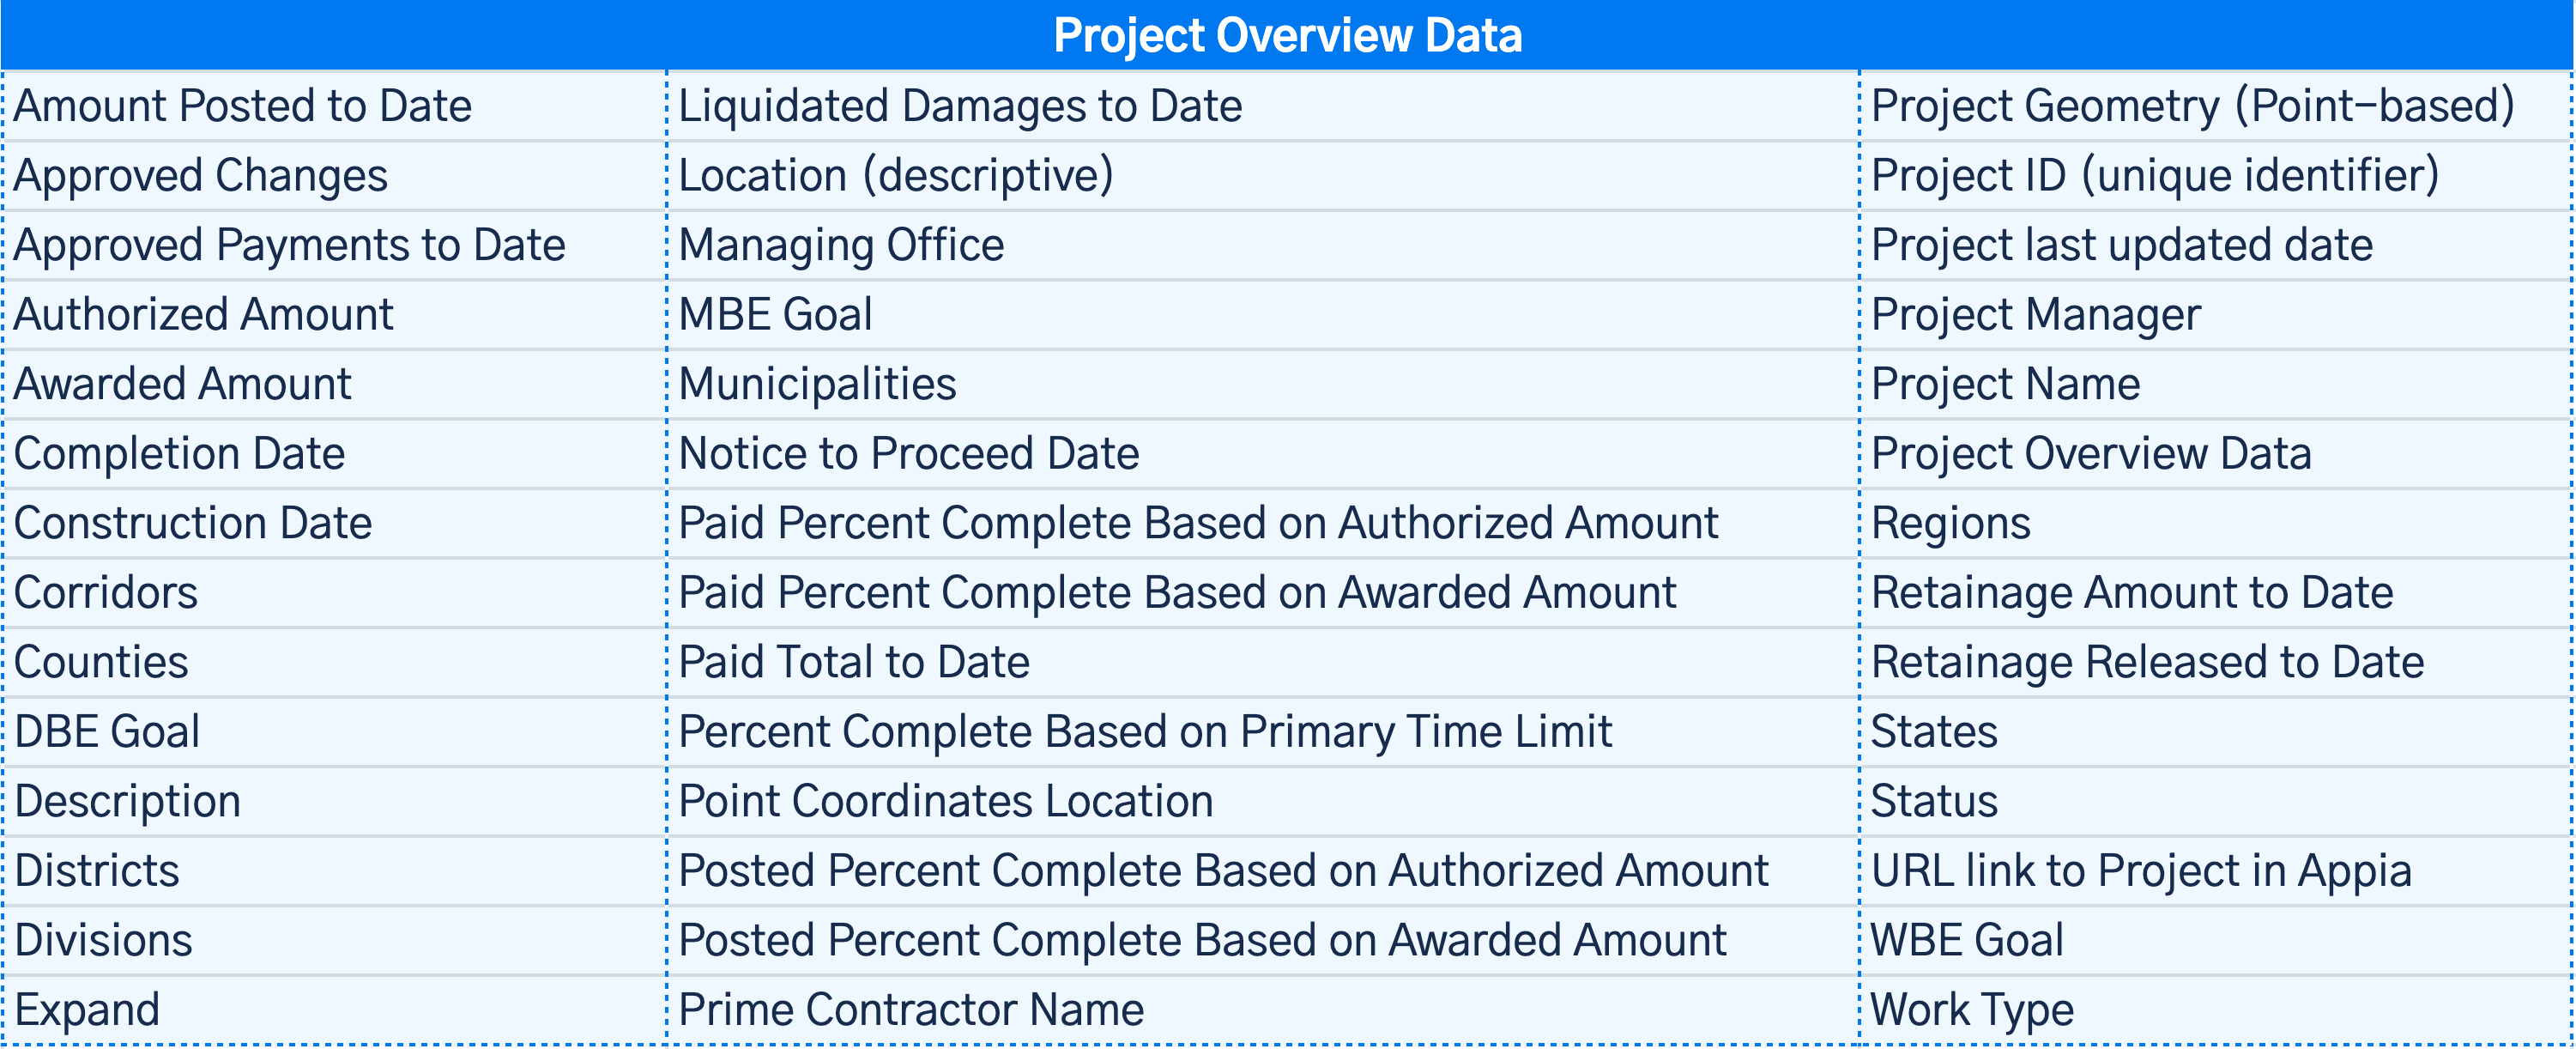 PROJECT-OVERVIEW-DATA.png